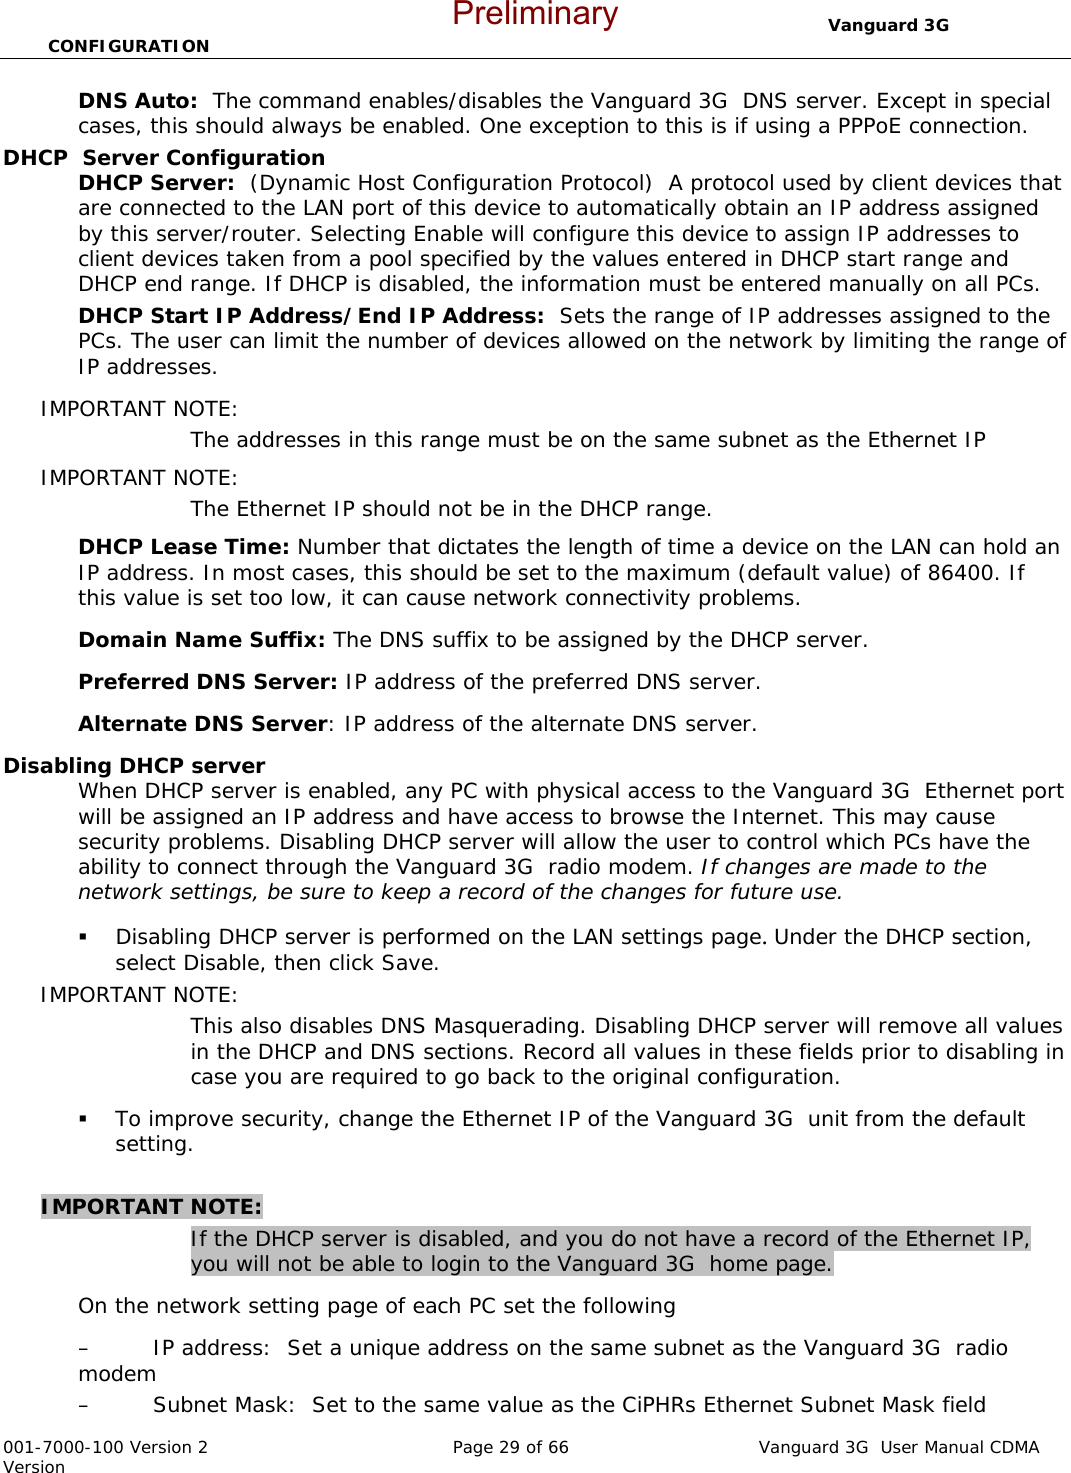                                  Vanguard 3G  CONFIGURATION  001-7000-100 Version 2       Page 29 of 66       Vanguard 3G  User Manual CDMA Version DNS Auto:  The command enables/disables the Vanguard 3G  DNS server. Except in special cases, this should always be enabled. One exception to this is if using a PPPoE connection.   DHCP  Server Configuration DHCP Server:  (Dynamic Host Configuration Protocol)  A protocol used by client devices that are connected to the LAN port of this device to automatically obtain an IP address assigned by this server/router. Selecting Enable will configure this device to assign IP addresses to client devices taken from a pool specified by the values entered in DHCP start range and DHCP end range. If DHCP is disabled, the information must be entered manually on all PCs.   DHCP Start IP Address/End IP Address:  Sets the range of IP addresses assigned to the PCs. The user can limit the number of devices allowed on the network by limiting the range of IP addresses.   IMPORTANT NOTE:   The addresses in this range must be on the same subnet as the Ethernet IP IMPORTANT NOTE:   The Ethernet IP should not be in the DHCP range.   DHCP Lease Time: Number that dictates the length of time a device on the LAN can hold an IP address. In most cases, this should be set to the maximum (default value) of 86400. If this value is set too low, it can cause network connectivity problems.  Domain Name Suffix: The DNS suffix to be assigned by the DHCP server.  Preferred DNS Server: IP address of the preferred DNS server. Alternate DNS Server: IP address of the alternate DNS server. Disabling DHCP server When DHCP server is enabled, any PC with physical access to the Vanguard 3G  Ethernet port will be assigned an IP address and have access to browse the Internet. This may cause security problems. Disabling DHCP server will allow the user to control which PCs have the ability to connect through the Vanguard 3G  radio modem. If changes are made to the network settings, be sure to keep a record of the changes for future use.  Disabling DHCP server is performed on the LAN settings page. Under the DHCP section, select Disable, then click Save.   IMPORTANT NOTE:   This also disables DNS Masquerading. Disabling DHCP server will remove all values in the DHCP and DNS sections. Record all values in these fields prior to disabling in case you are required to go back to the original configuration.    To improve security, change the Ethernet IP of the Vanguard 3G  unit from the default setting.    IMPORTANT NOTE:  If the DHCP server is disabled, and you do not have a record of the Ethernet IP, you will not be able to login to the Vanguard 3G  home page.   On the network setting page of each PC set the following – IP address:  Set a unique address on the same subnet as the Vanguard 3G  radio modem – Subnet Mask:  Set to the same value as the CiPHRs Ethernet Subnet Mask field Preliminary